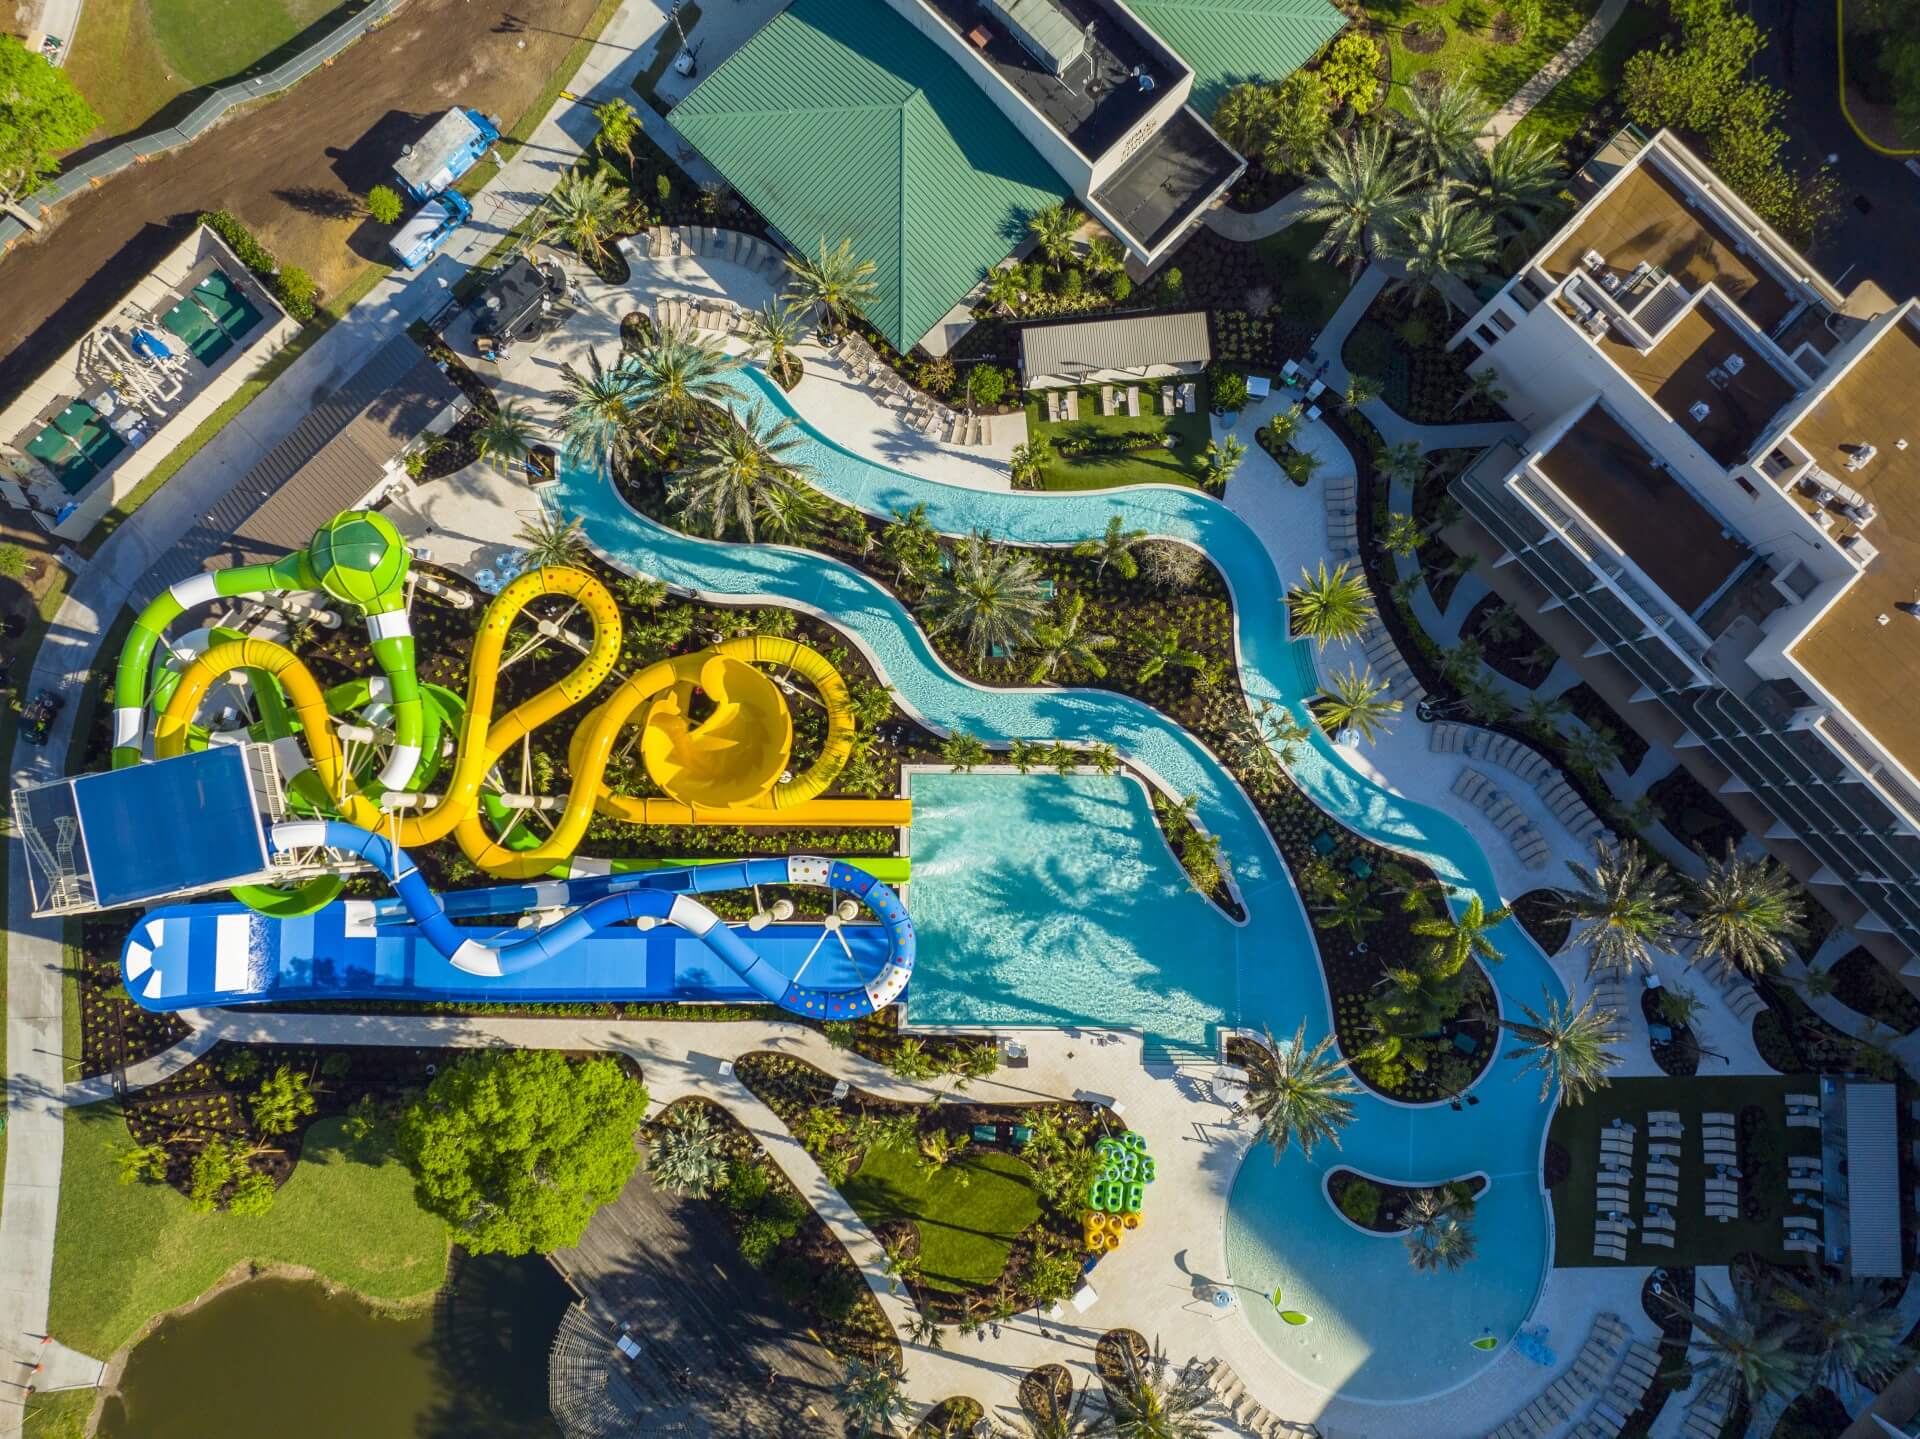 An aerial view of the river and slide tower at the new poolscape of the River Falls Waterpark at Orlando World Center Marriott